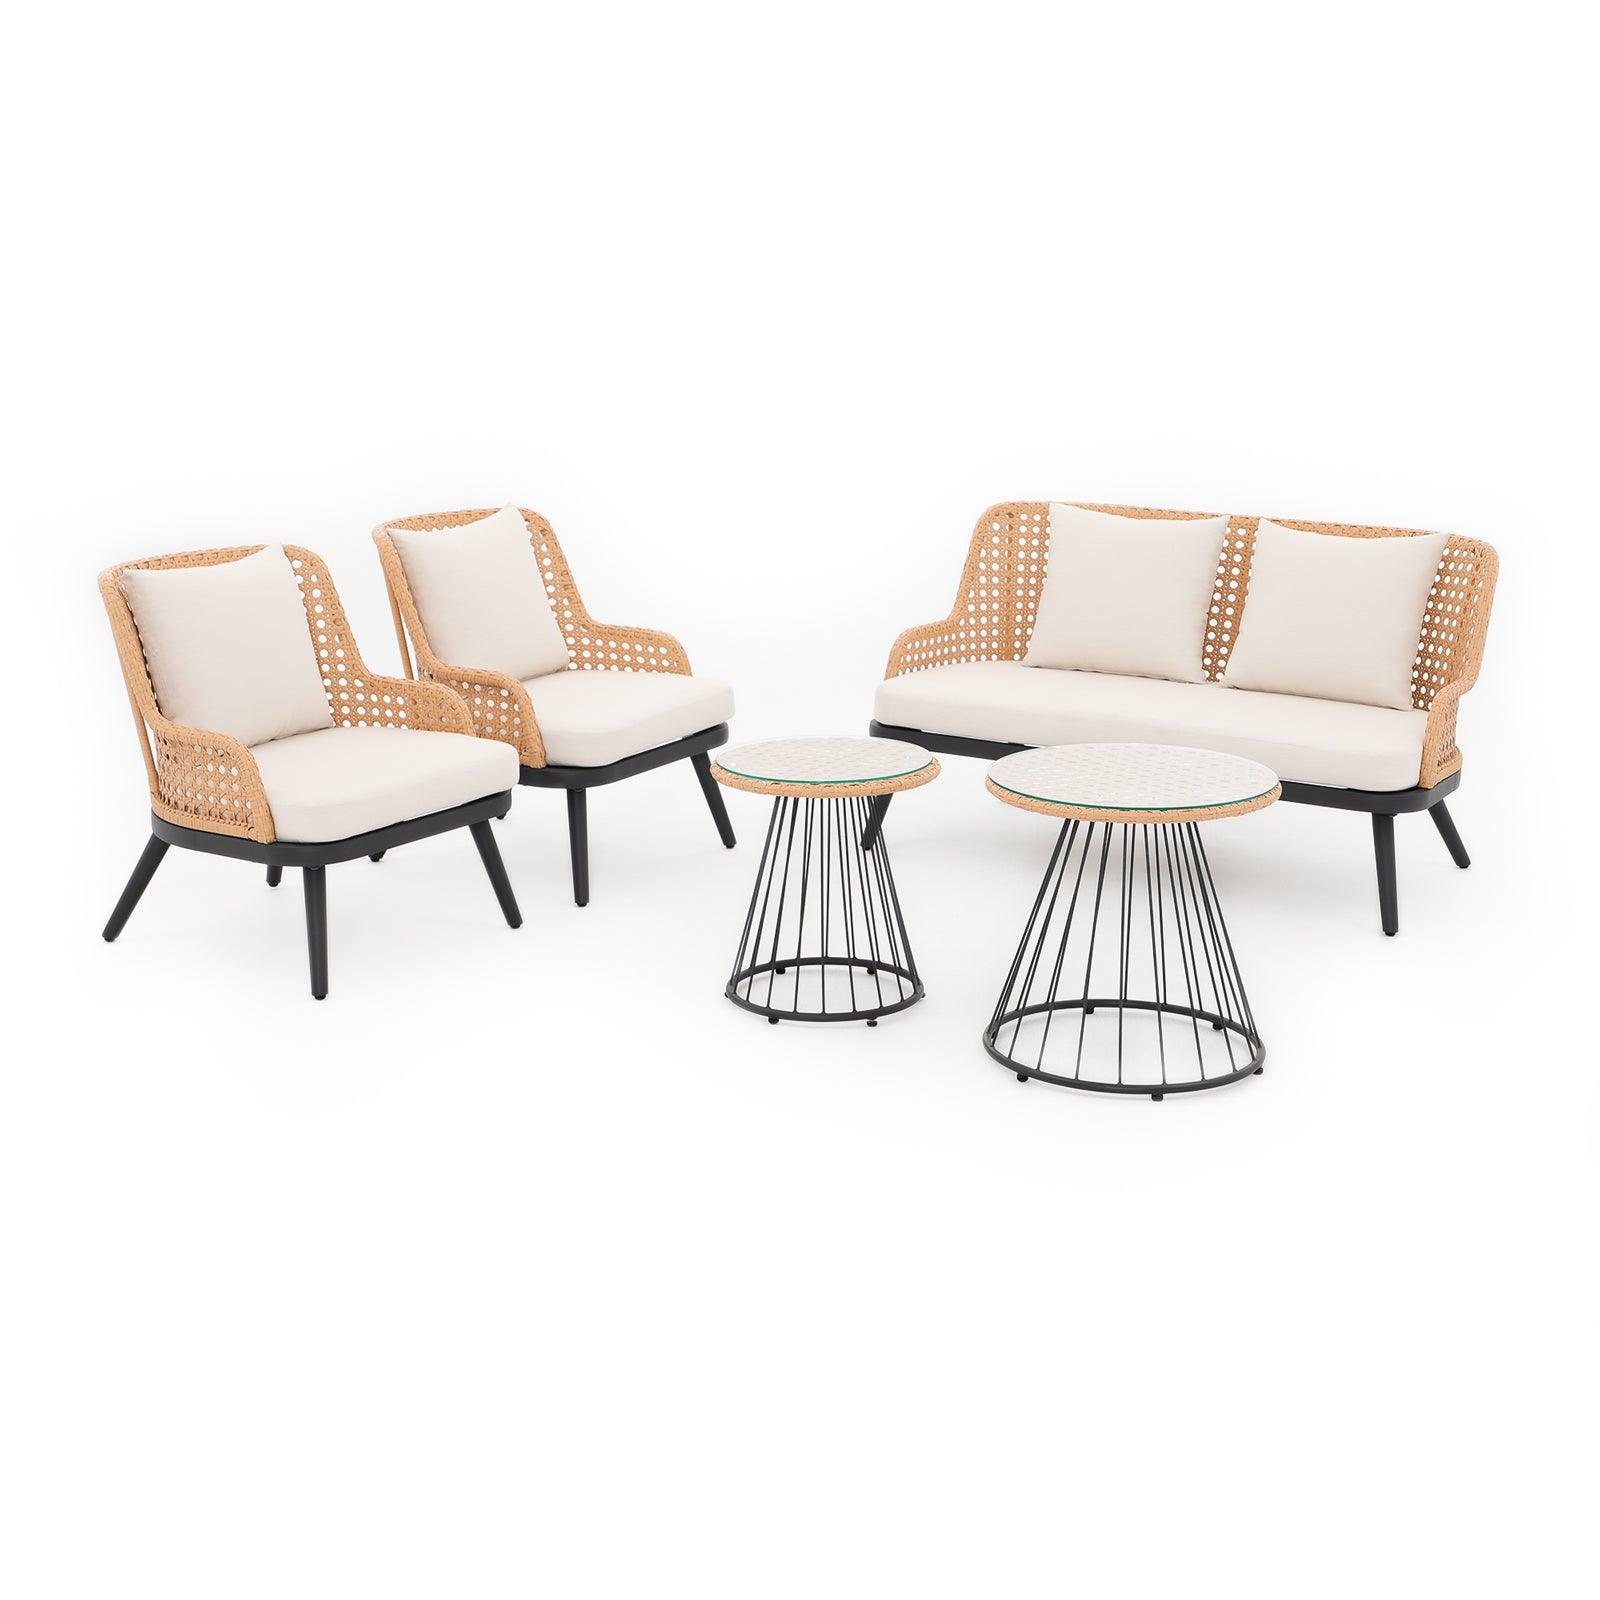 Menorca Modern Wicker Outdoor Furniture with steel frame, 5-Piece outdoor conversation set, white cushions, a loveseat, 2 arm chairs , 1 mixed set of tables, Side Angle View- Jardina Furniture